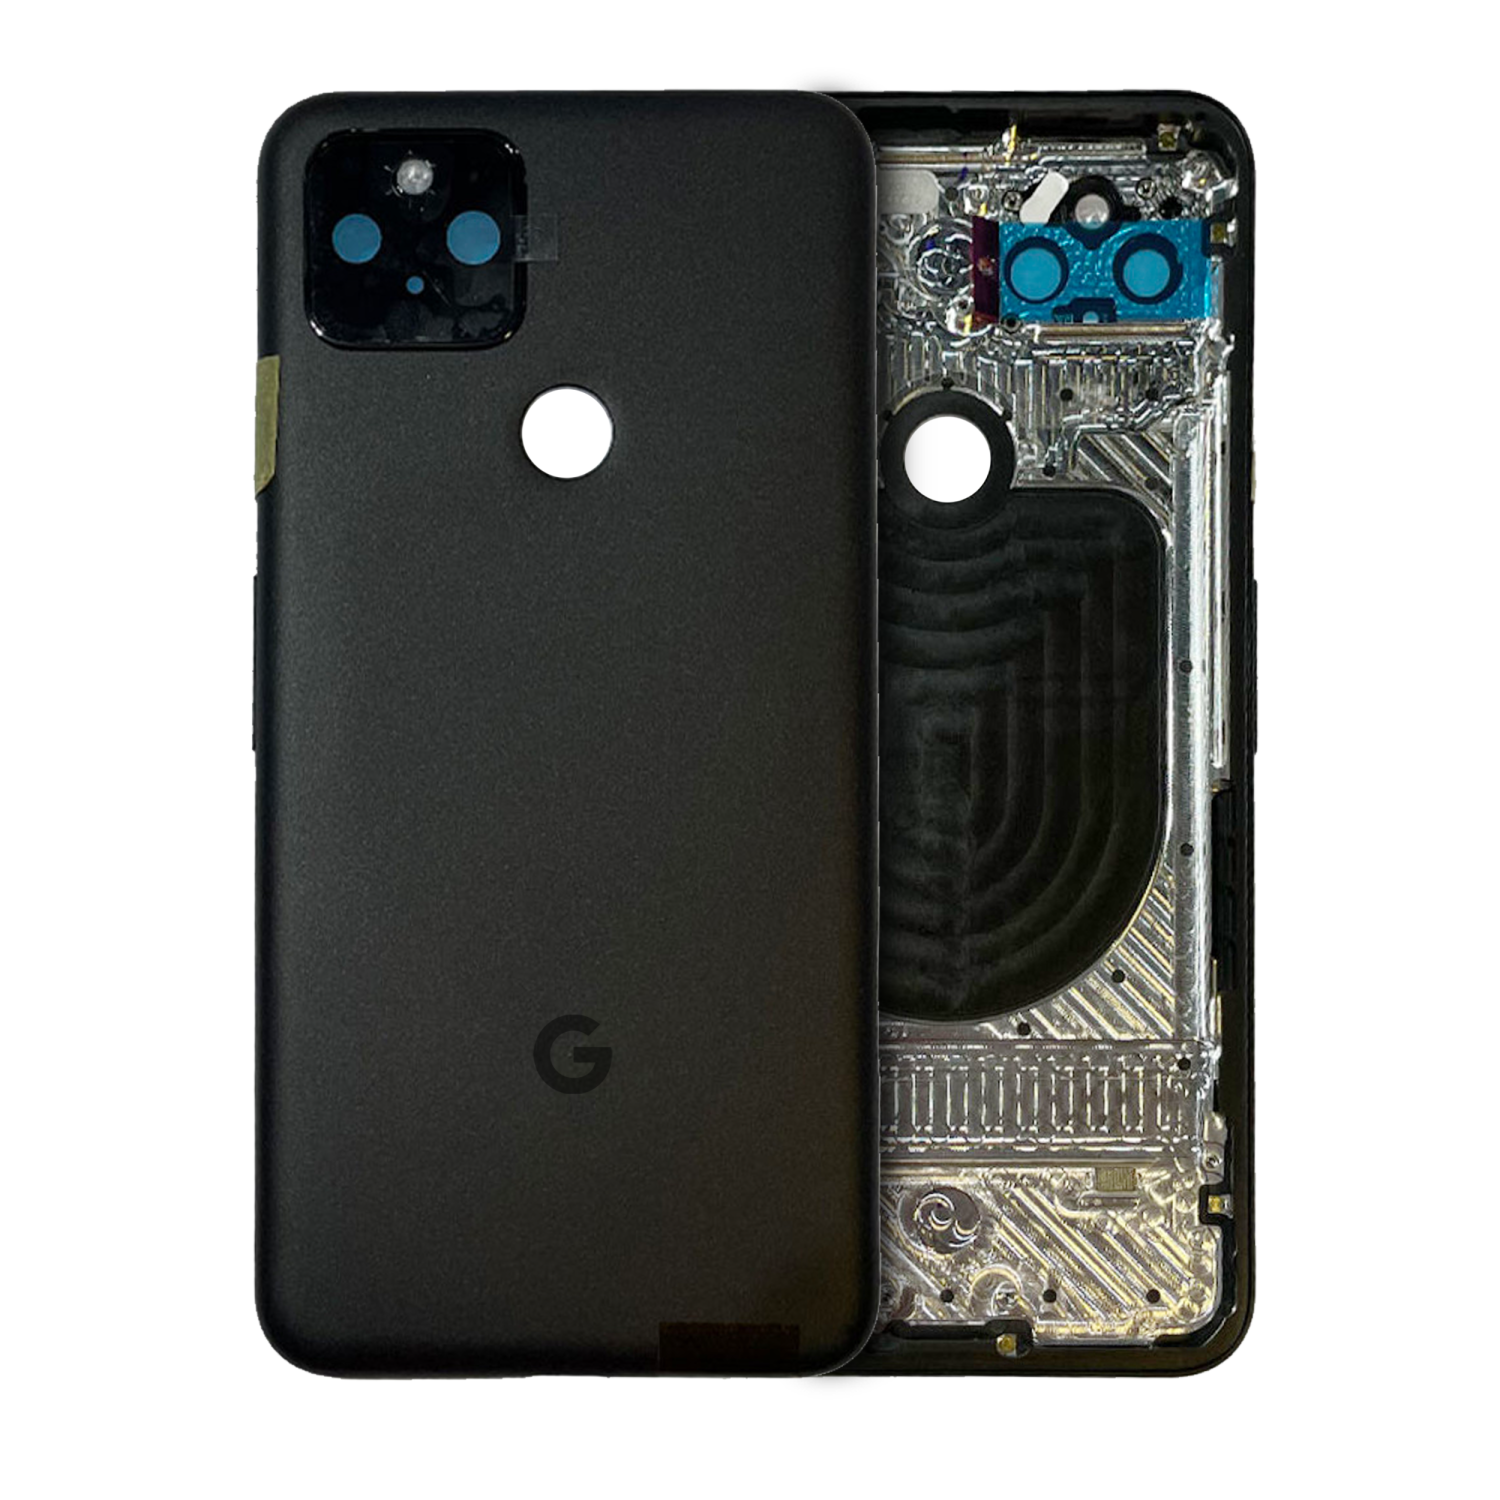 Replacement Housing Assembly Compatible With Google Pixel 5 (Genuine OEM) (US / JP) (Black)